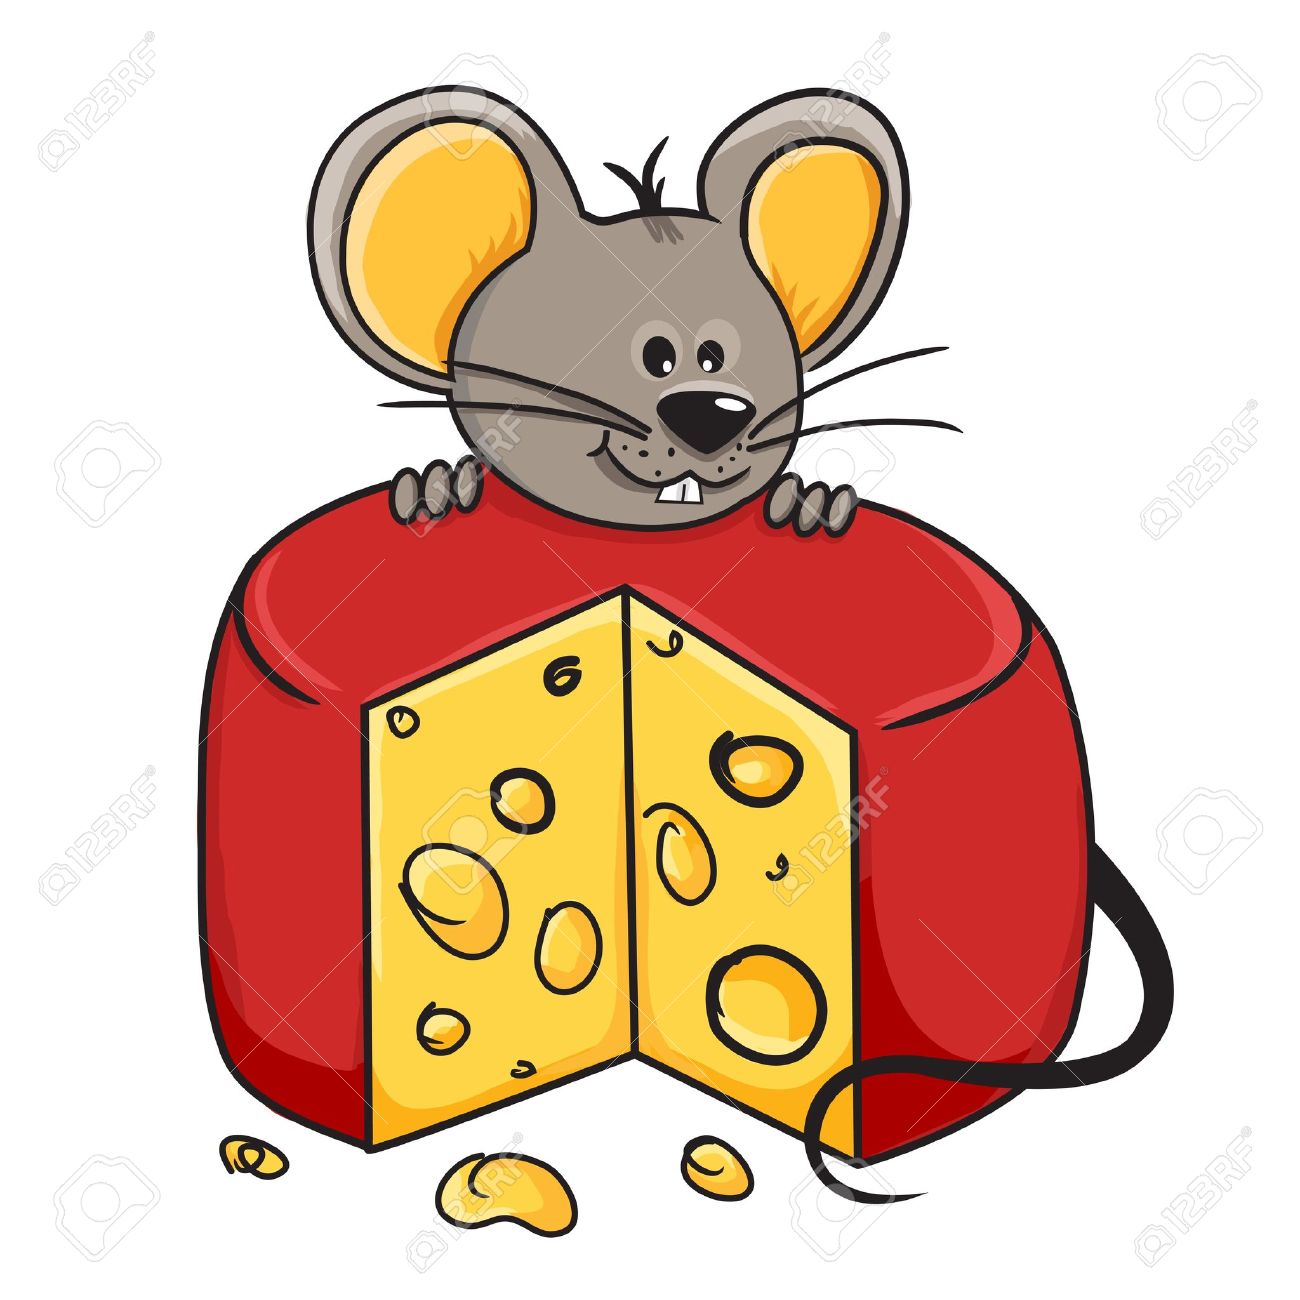 Cartoon pictures group holding. Cheese clipart mouse